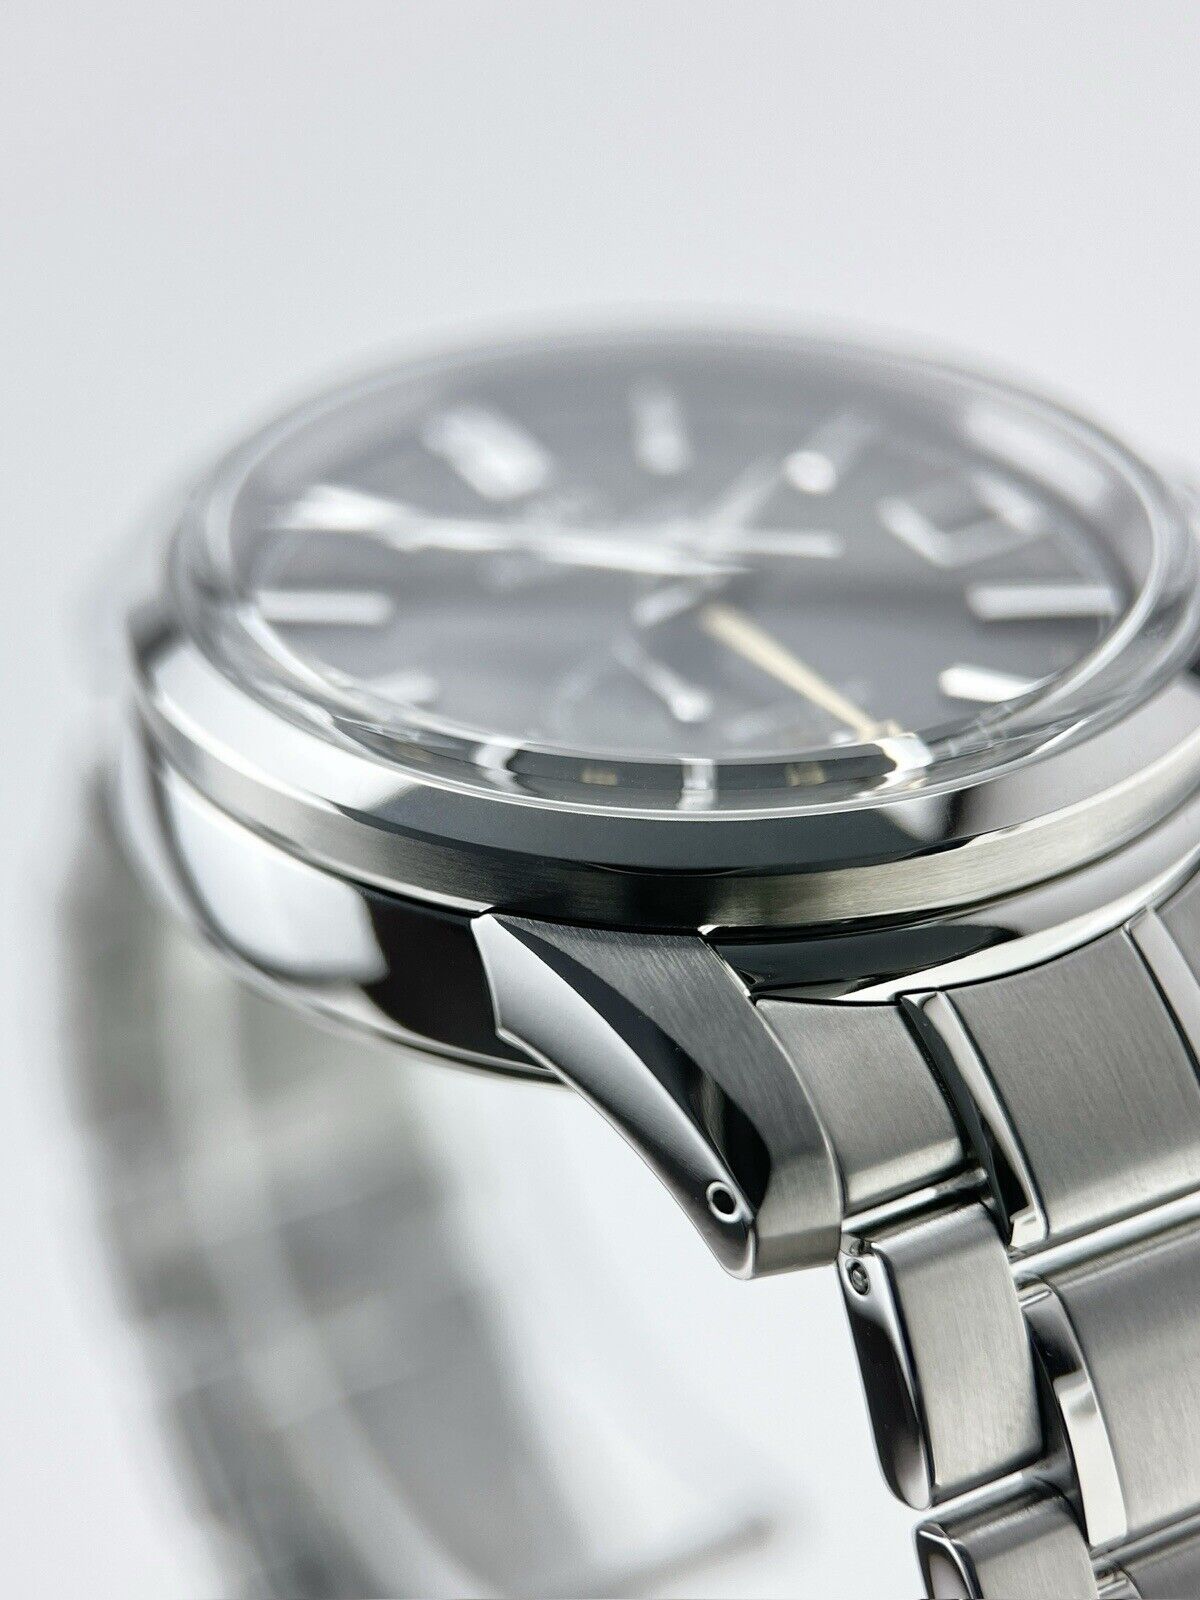 NEW 2023 Grand Seiko Autumn Kanro Automatic 40mm  SBGE271 - Box And Papers